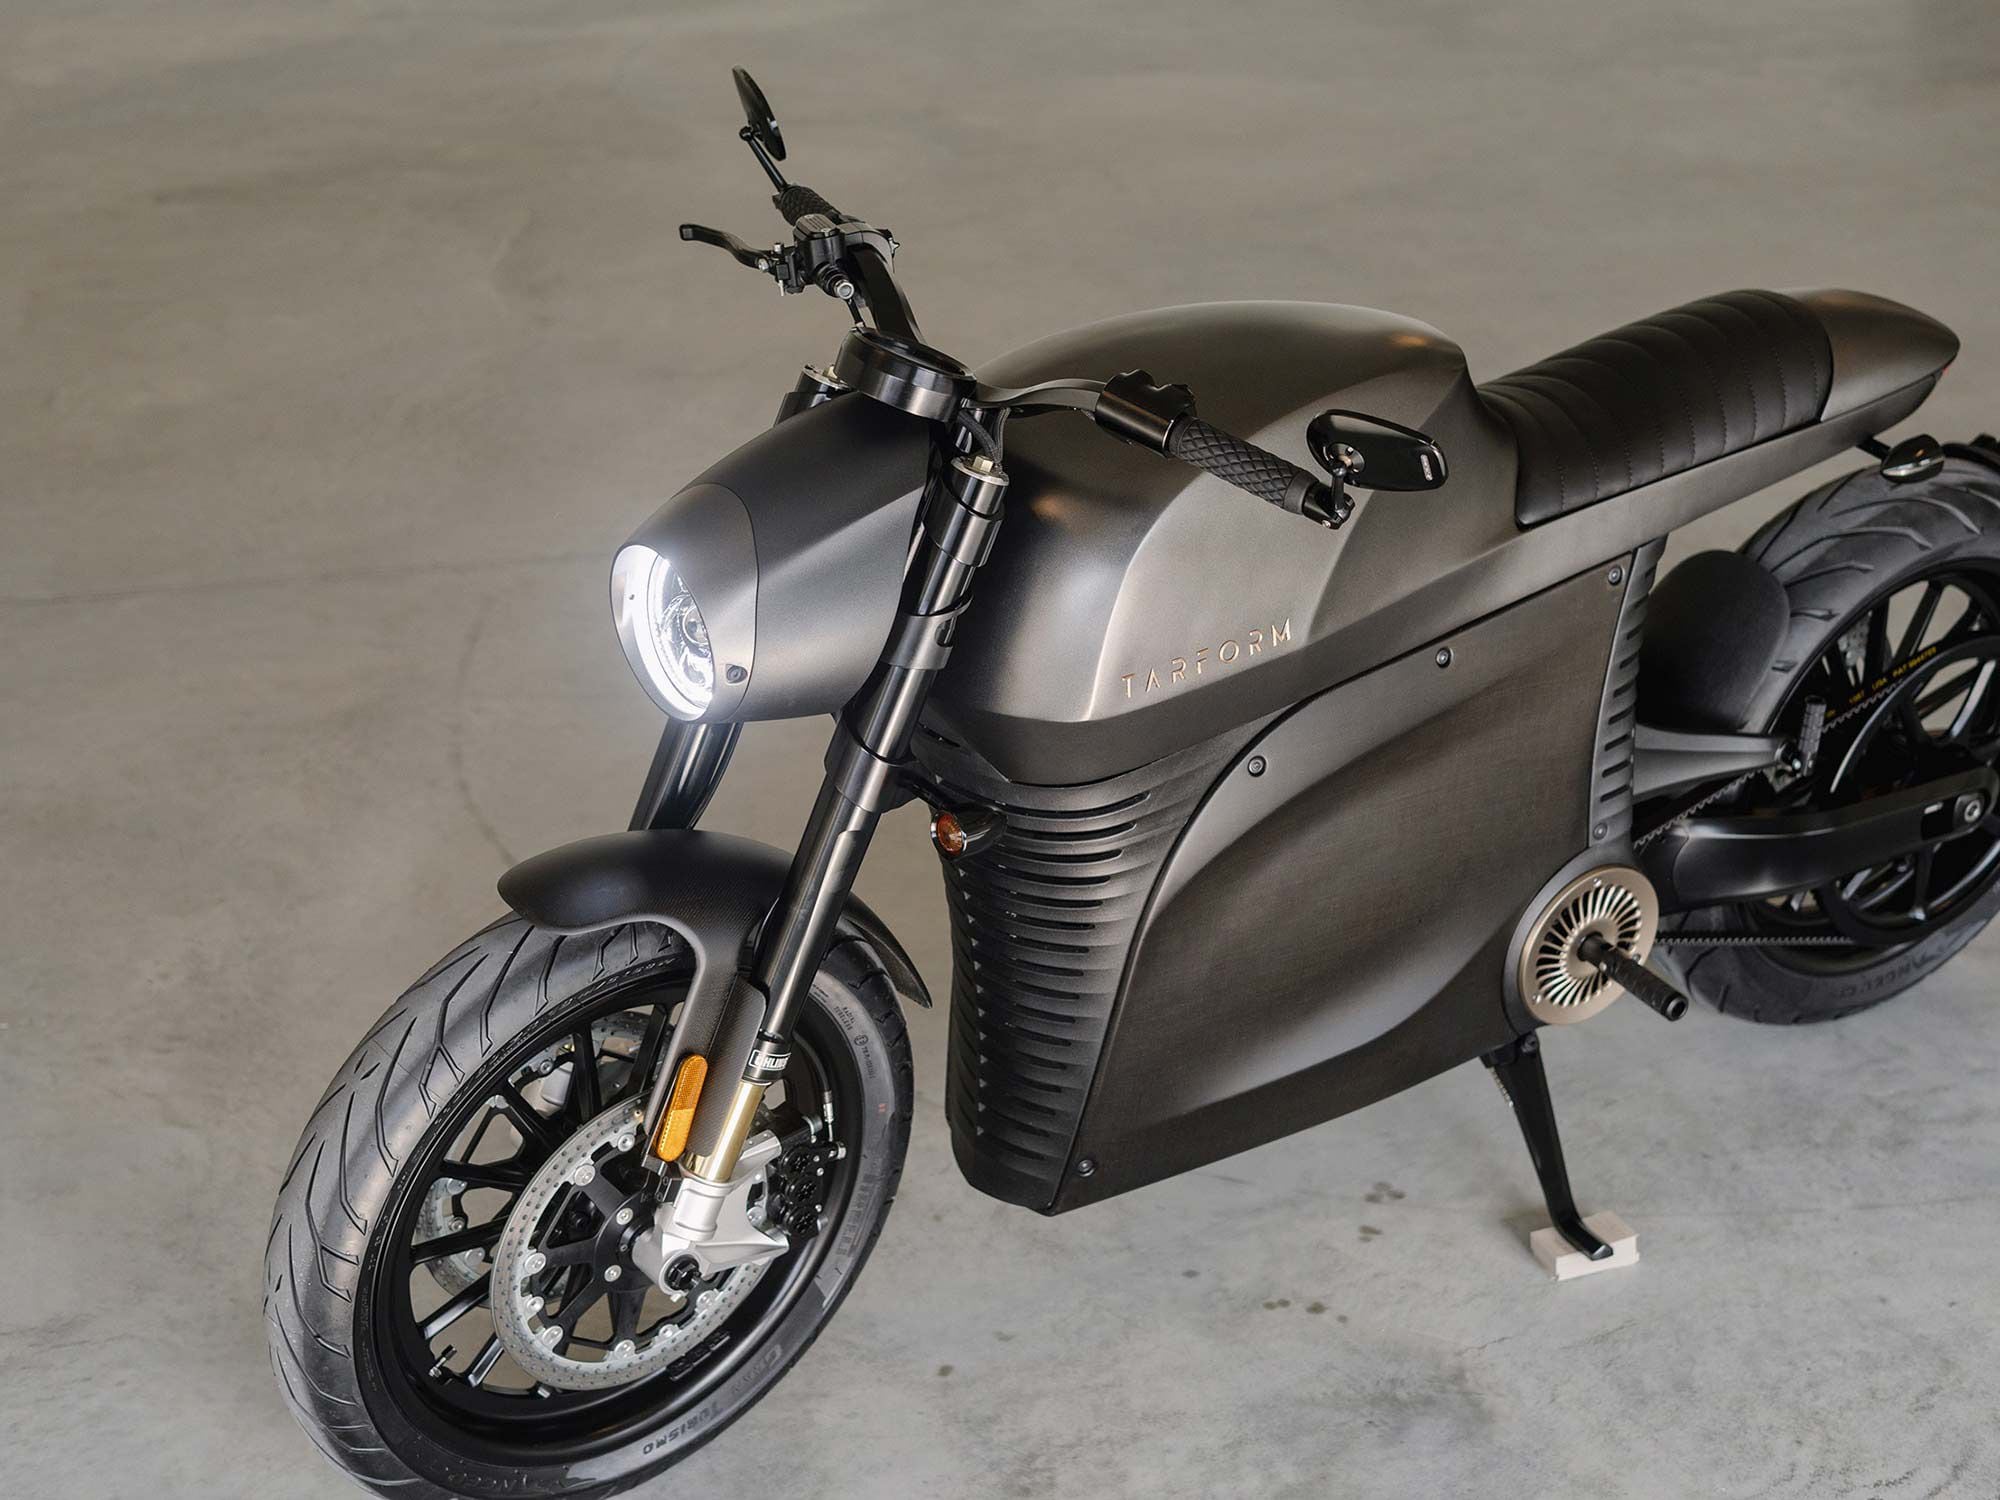 Side panels and other body parts on all Tarform bikes feature composite materials based on natural fibers, so they’re recyclable as well as biodegradable.